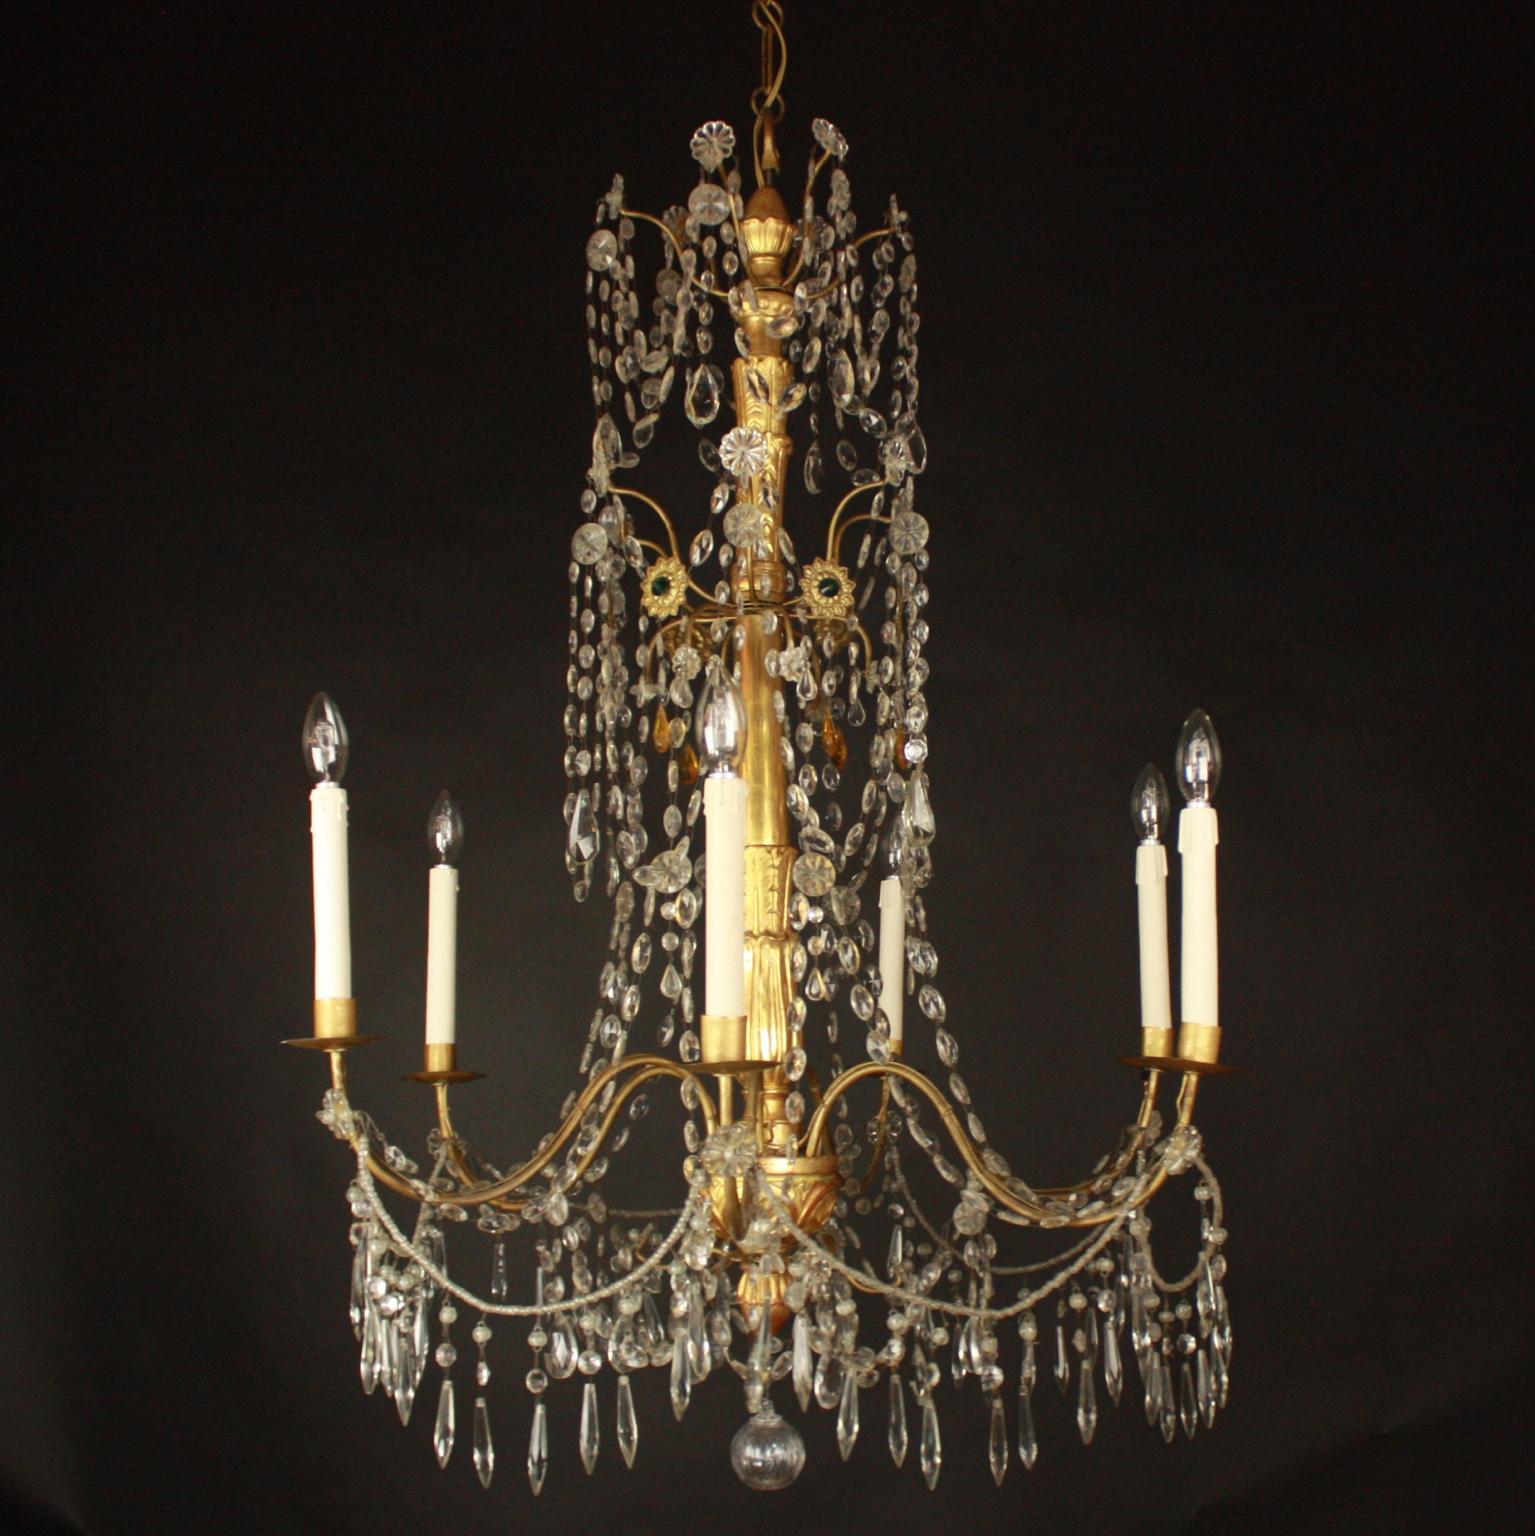 Italian Pair of Late 18th Century Neoclassical Genoa/Italy Giltwood Crystal Chandeliers